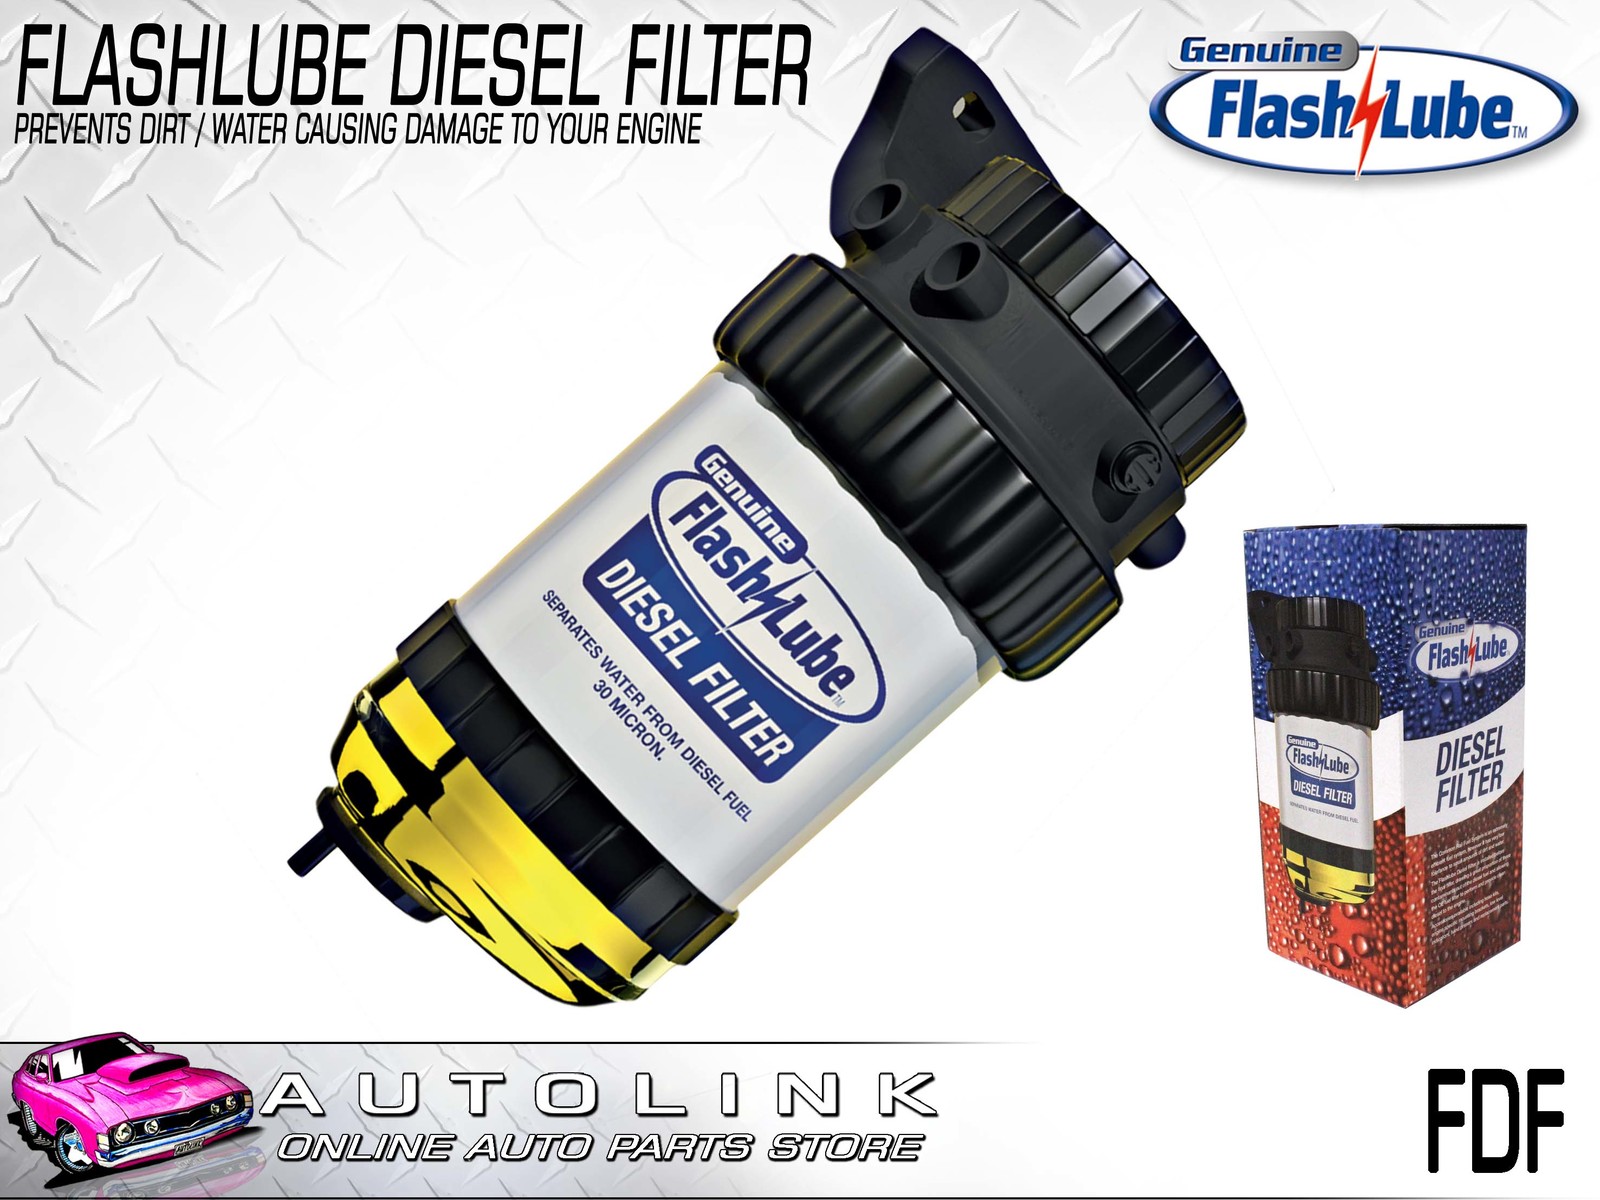 FLASH LUBE FDF COMMON RAIL DIESEL PRE FILTER WITH WATER SEPARATOR